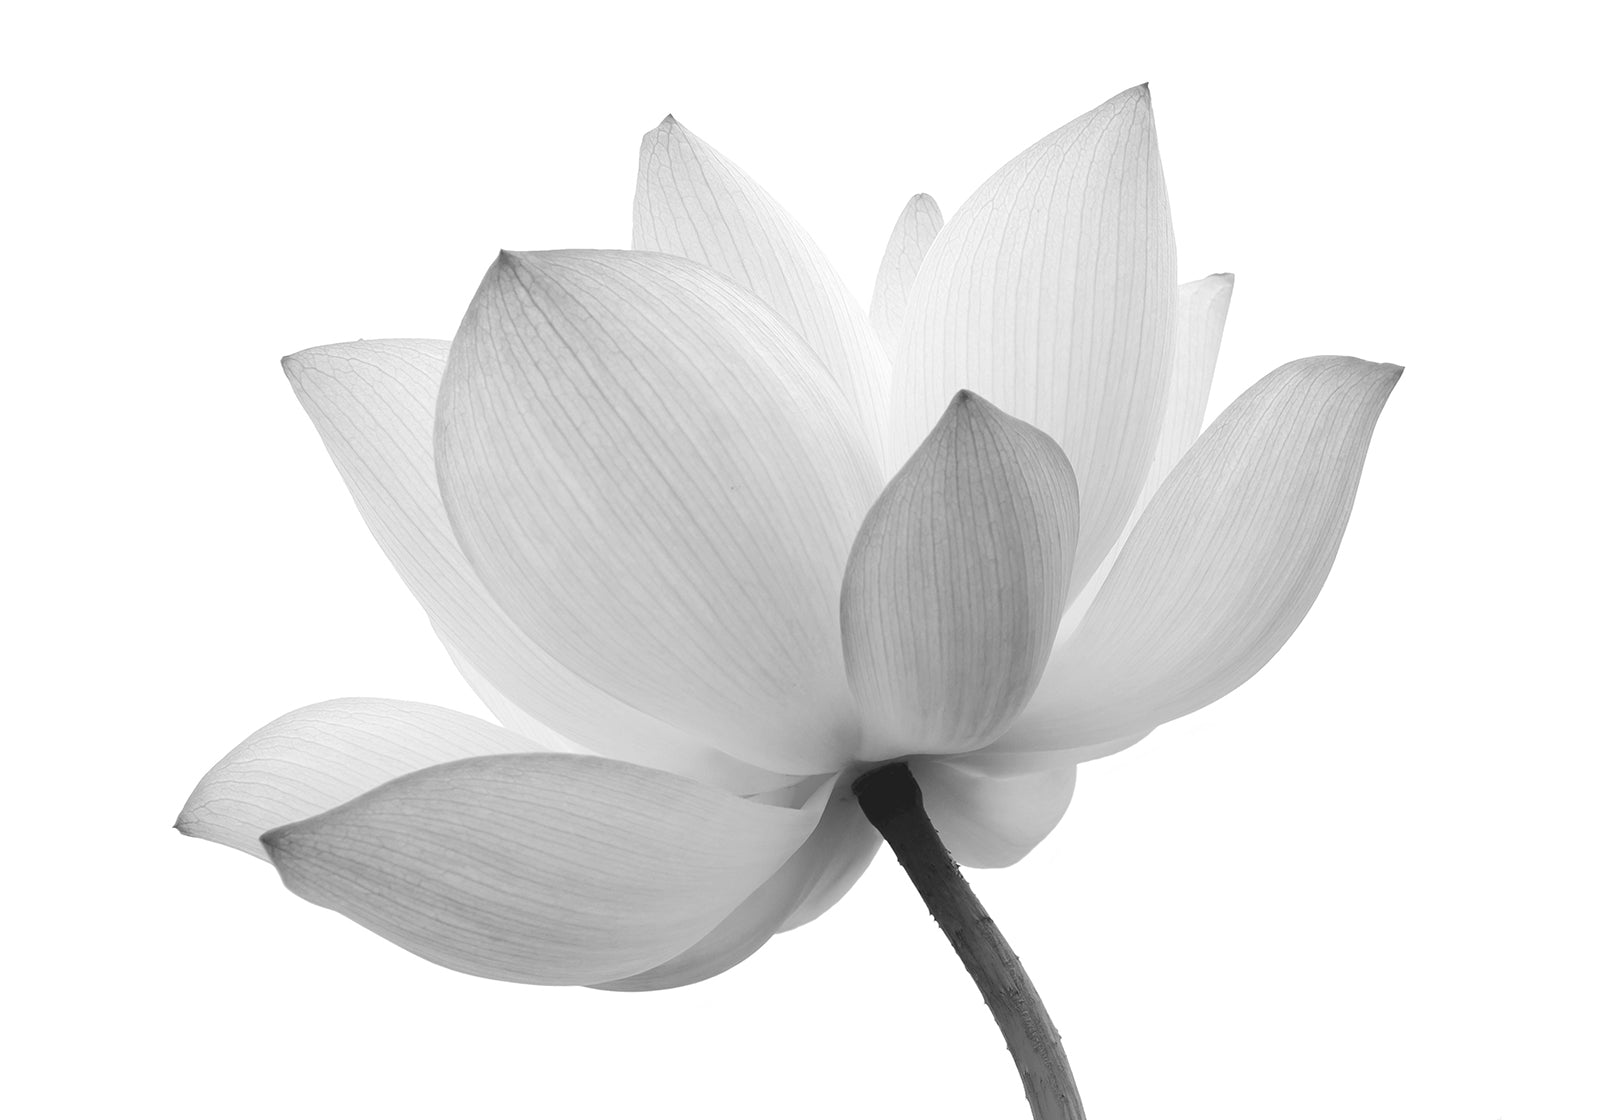 Lotus Flower Black and White Floral Nature Photo Fine Art Canvas Print  - PIPAFINEART